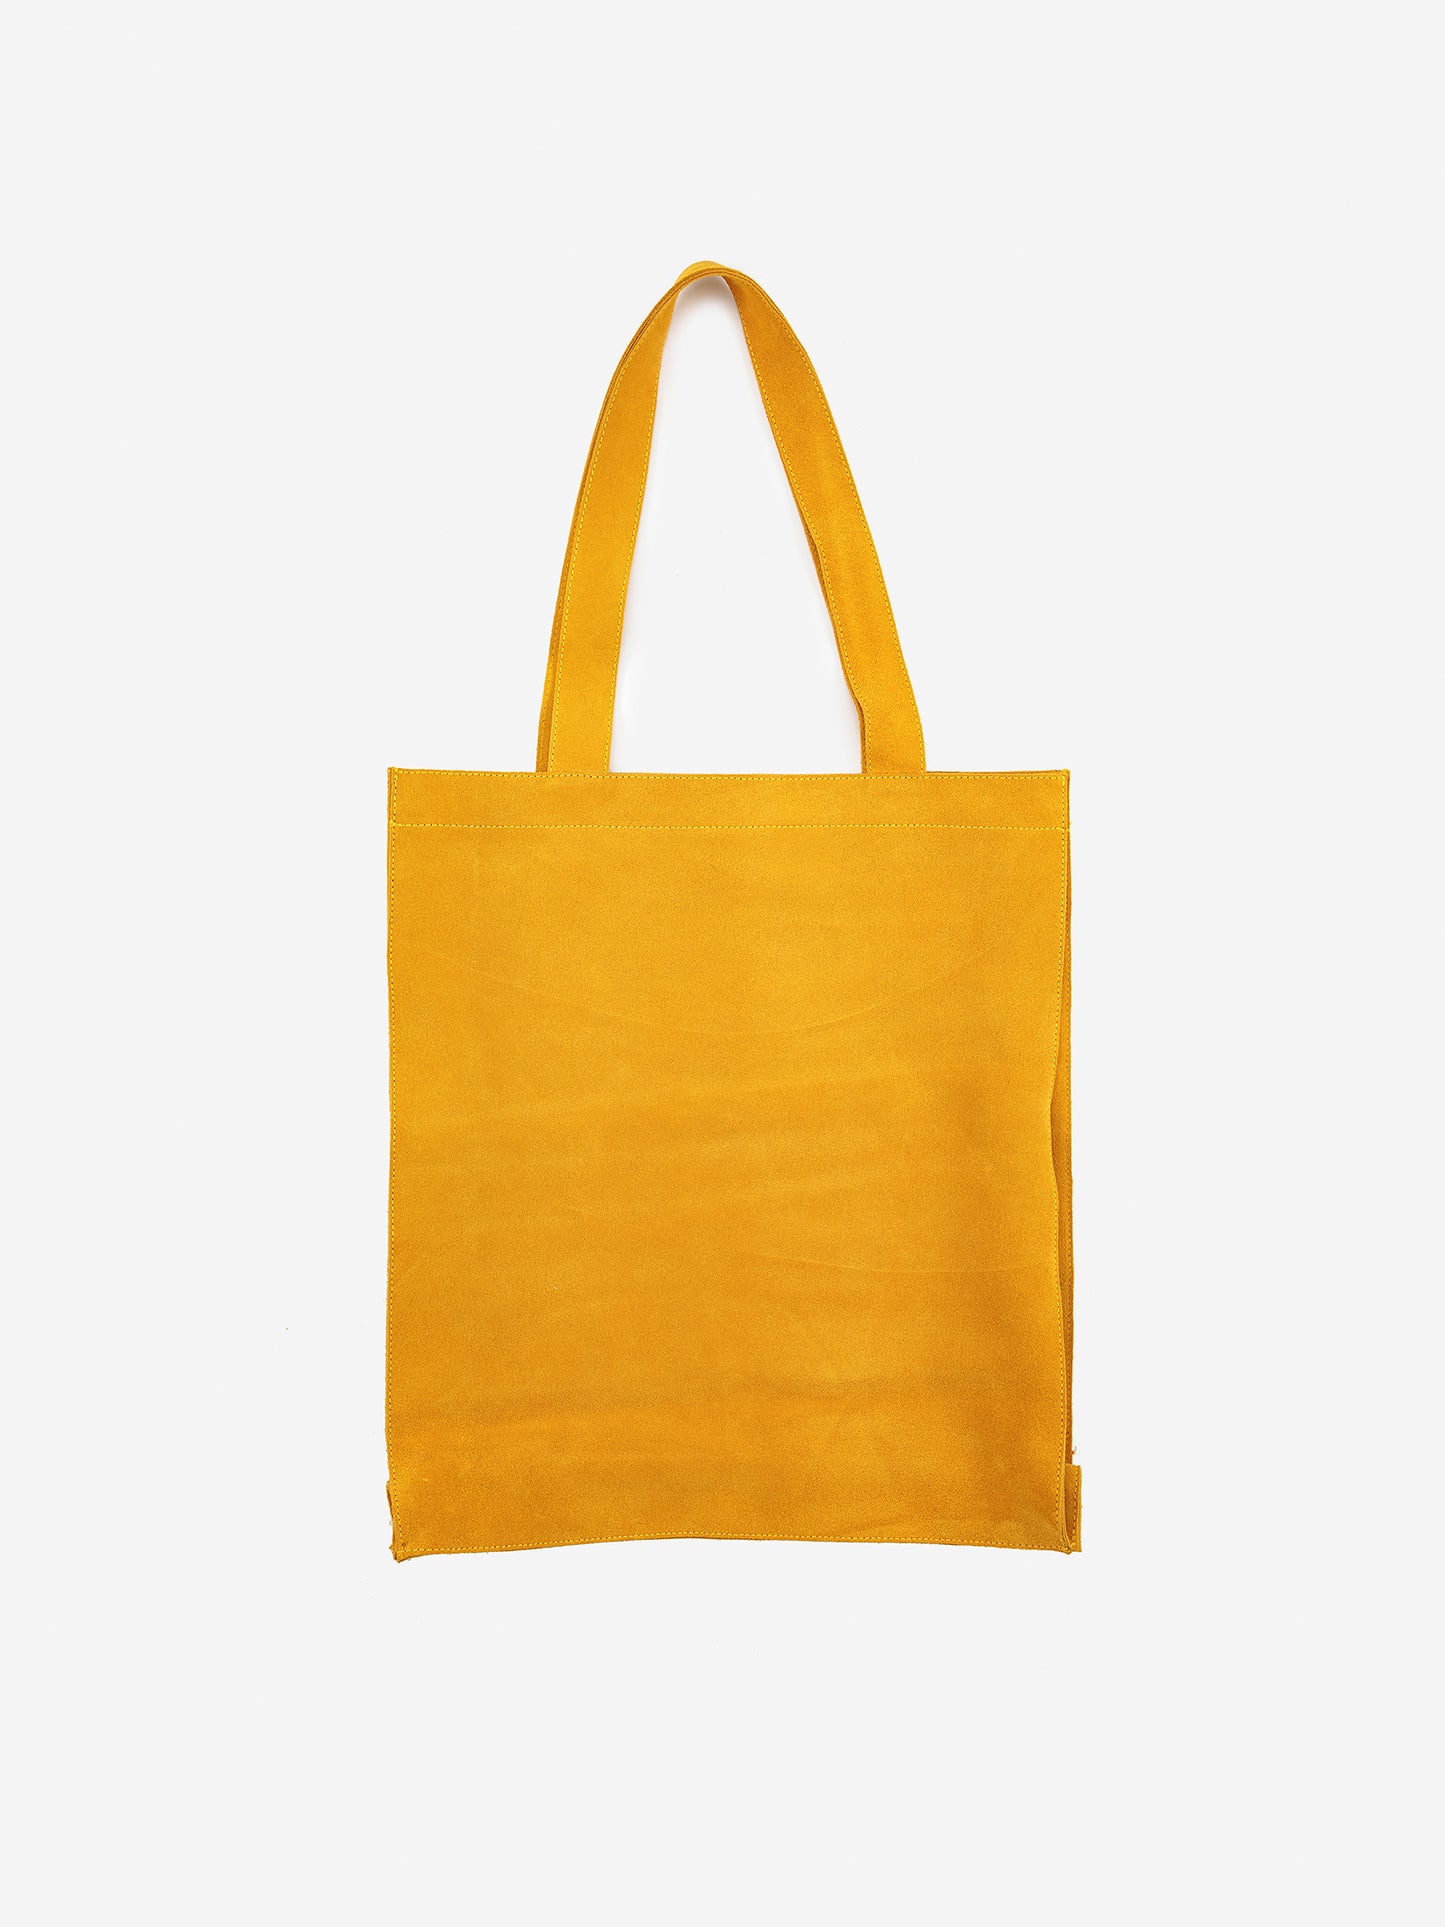 FOREVER NOW SUEDE TOTE || BOBO CHOSES